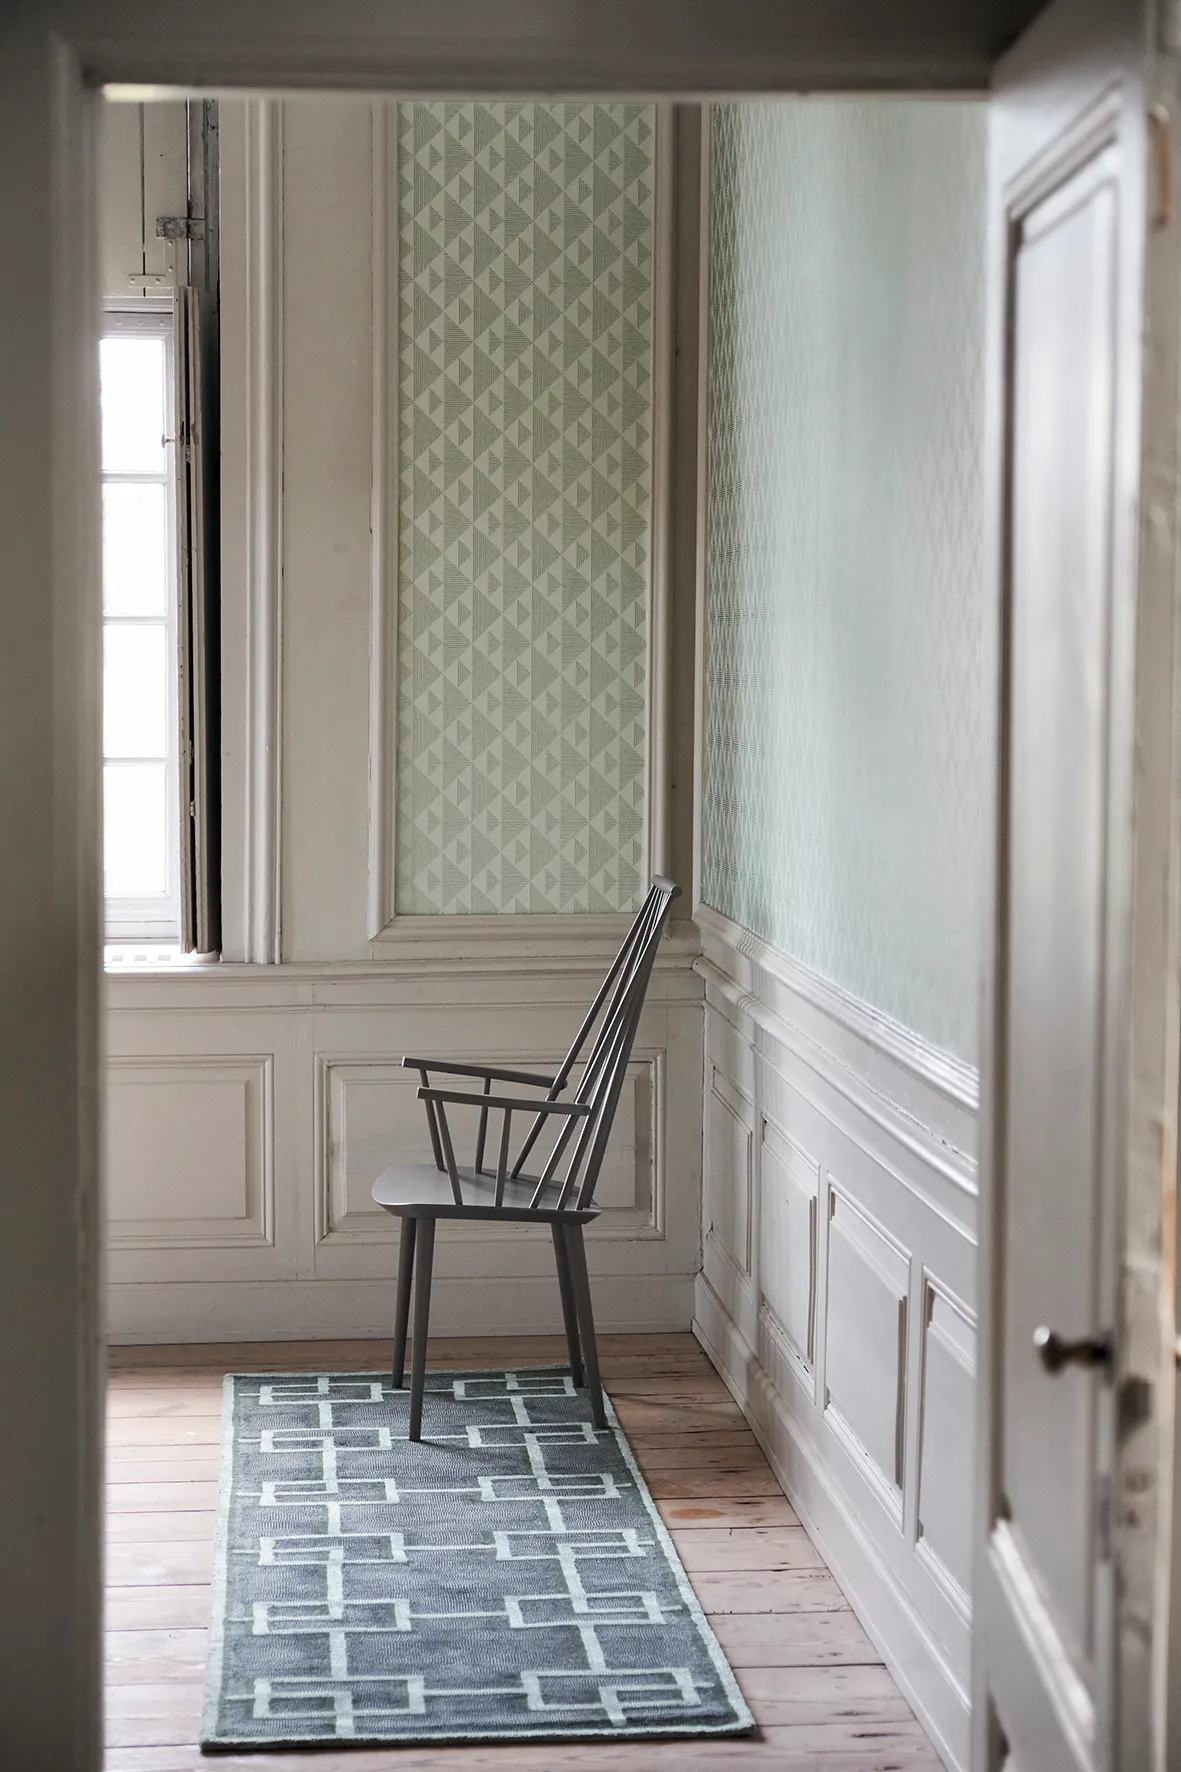 For a design that’s eye-catching and graphic, you can’t beat the Rheinsberg runner in Granite, £325, Designers Guild.